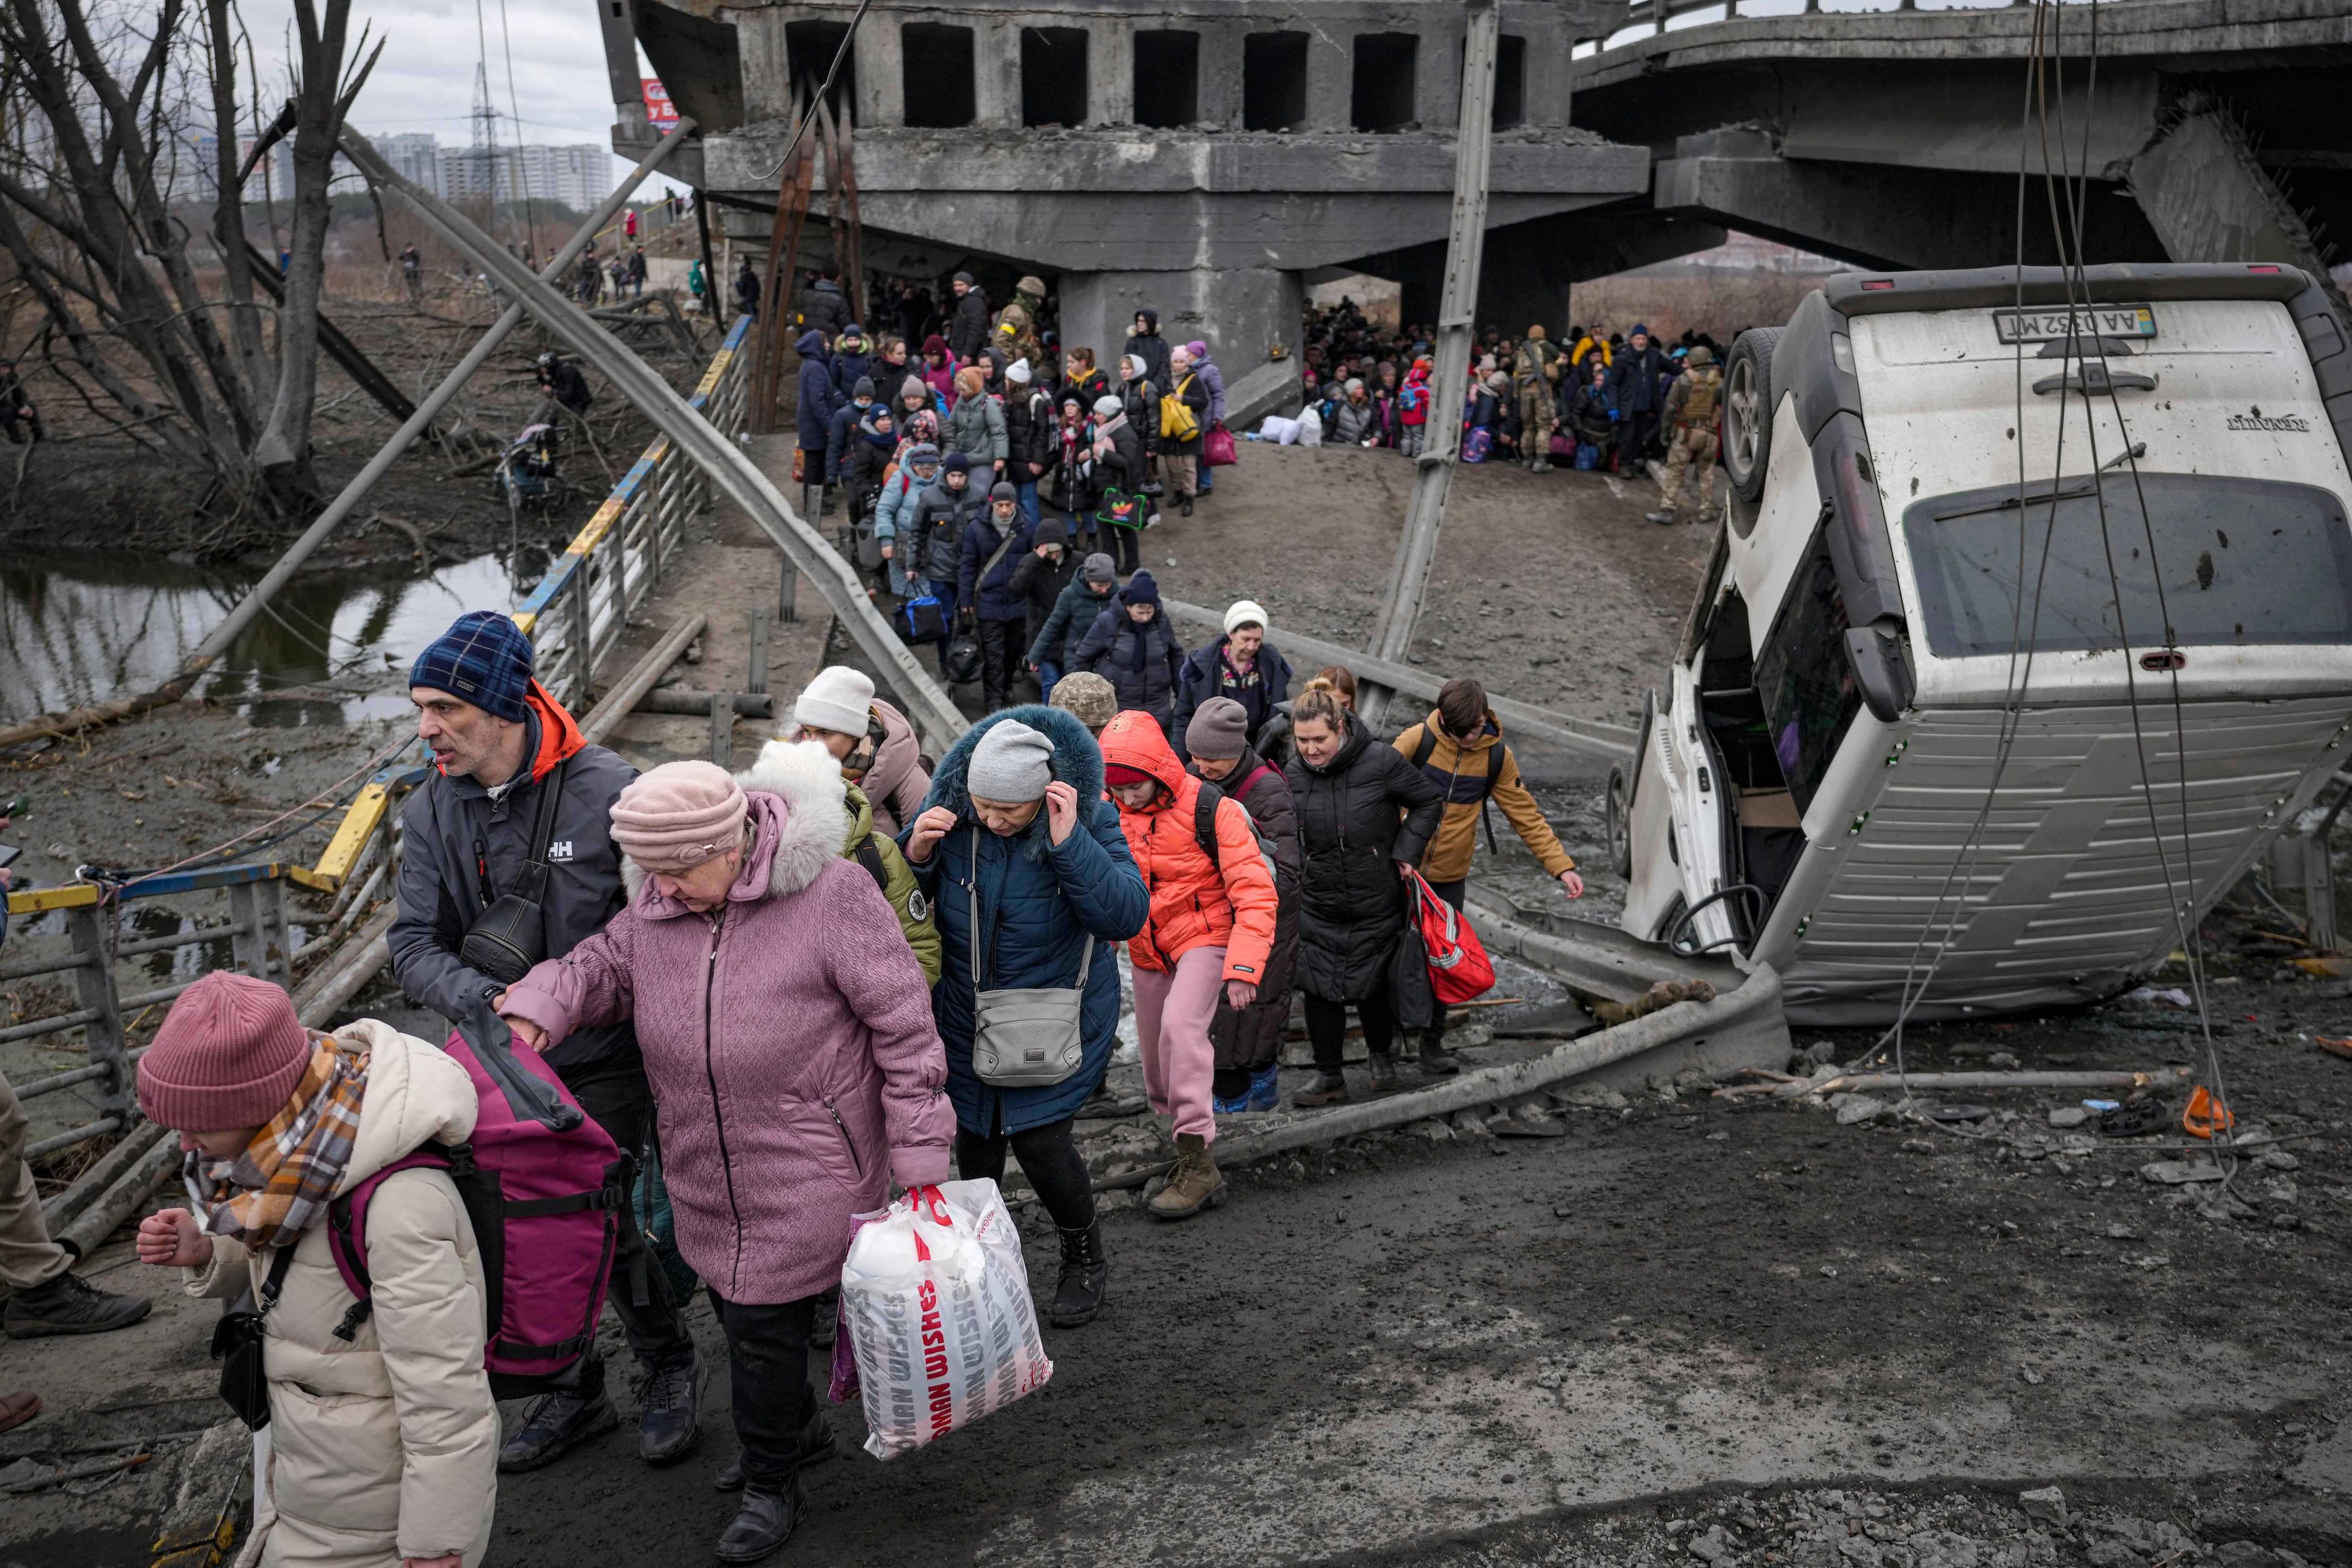 People cross on an improvised path under a bridge that was destroyed by a Russian airstrike, while fleeing the town of Irpin, Ukraine, Saturday, March 5, 2022. (Vadim Ghirda/AP)